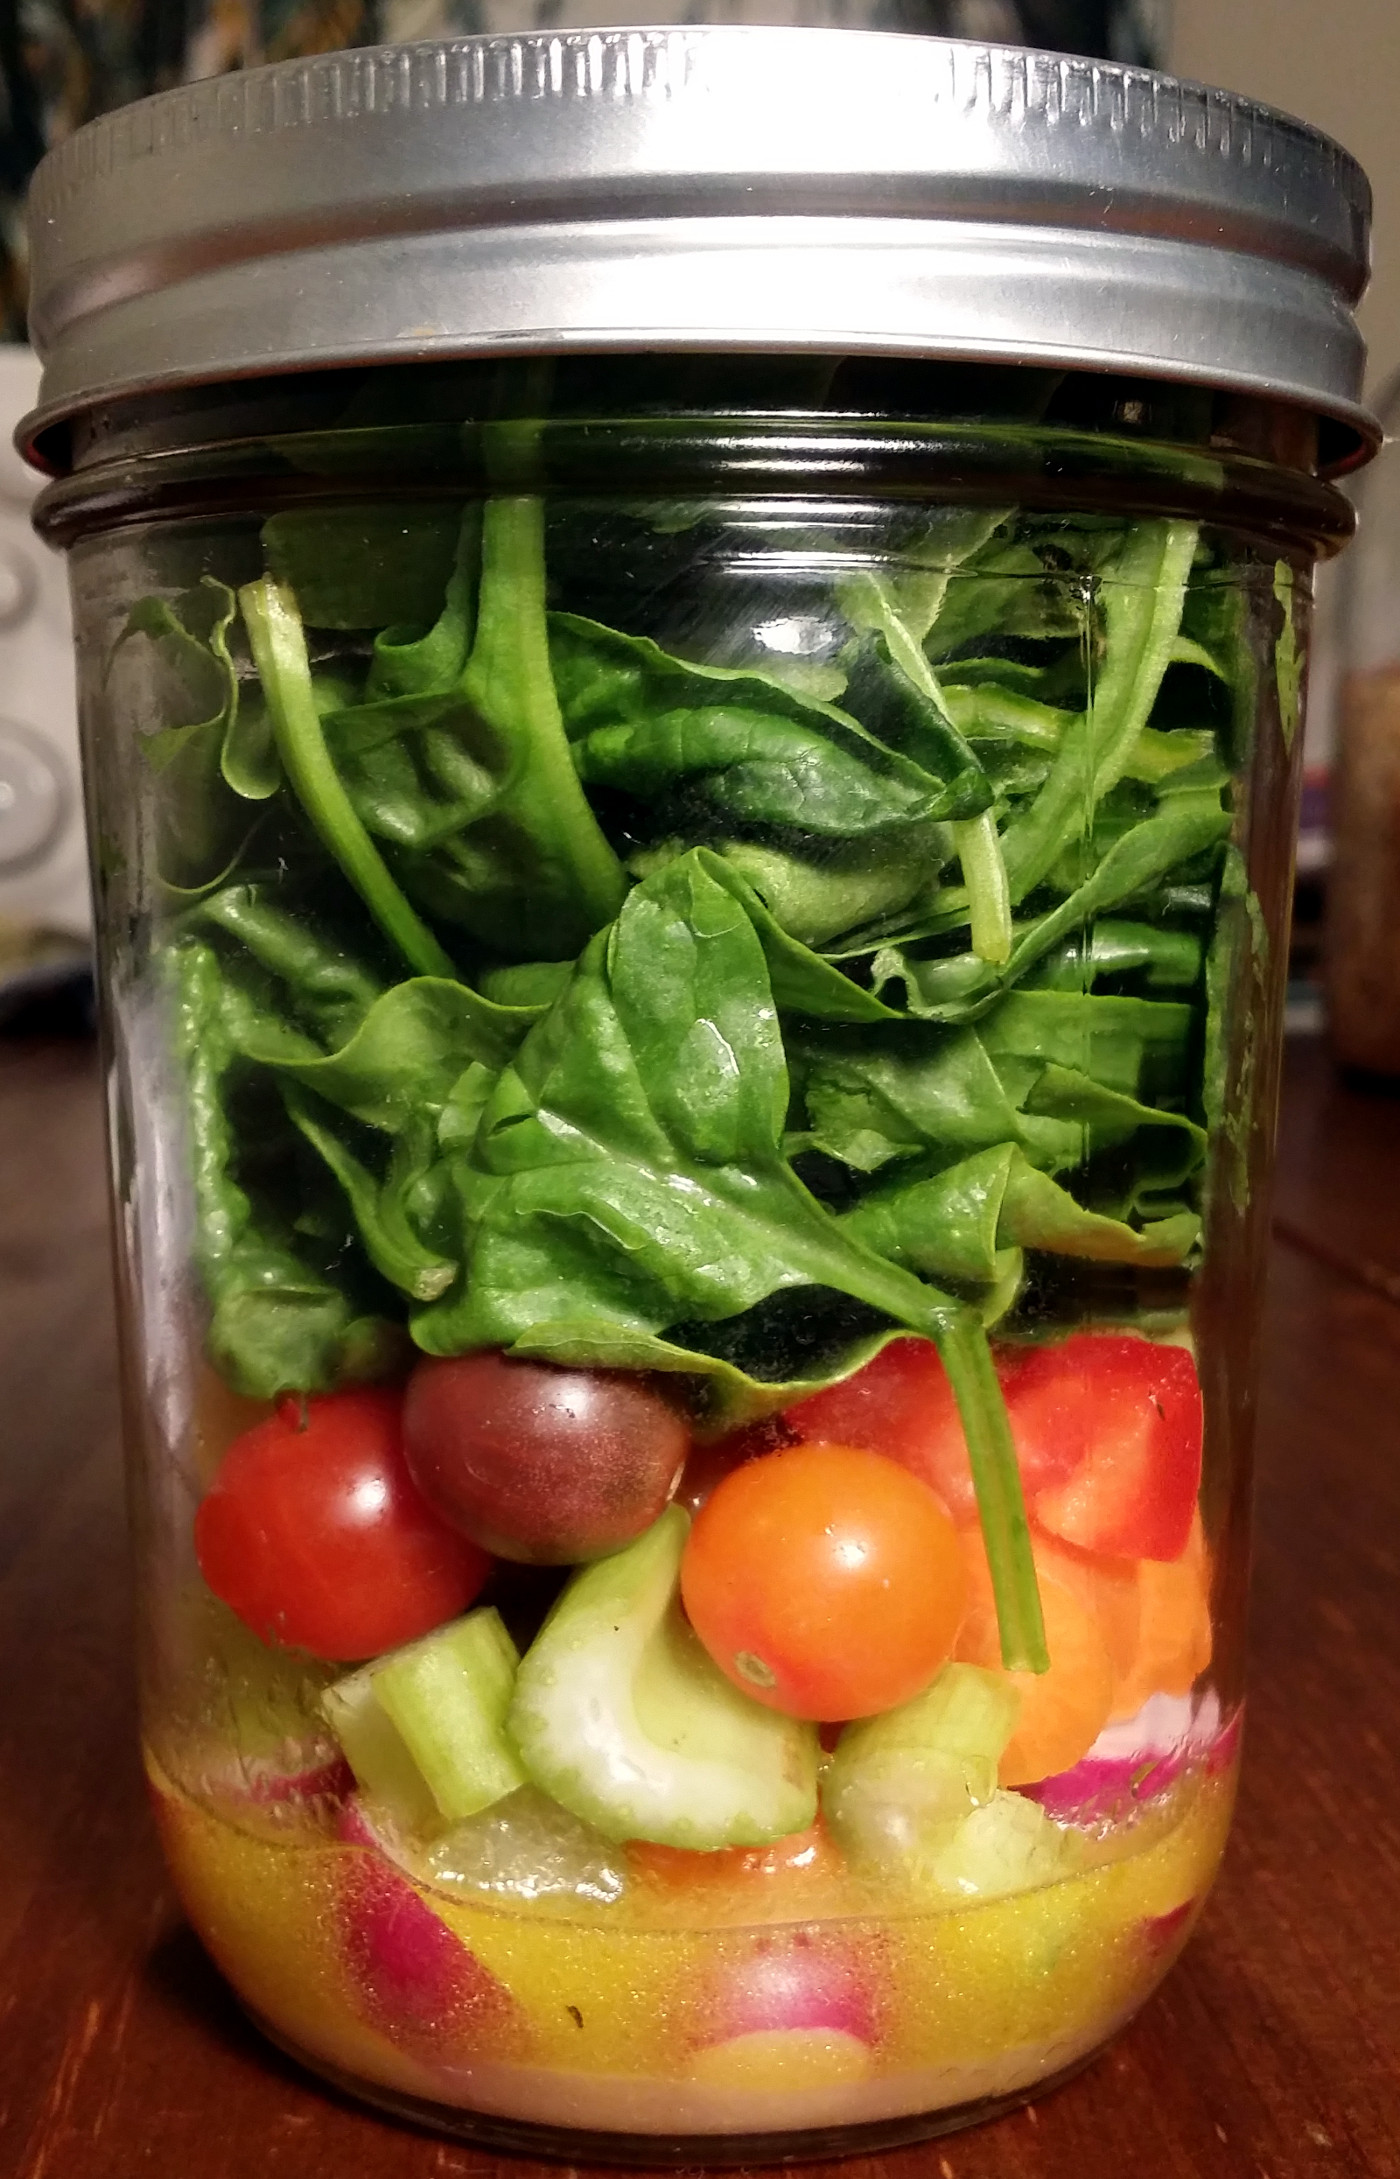 Vegetables and spinach are packed in a jar with salad dressing in the bottom. The jar is sitting on a wooden table.